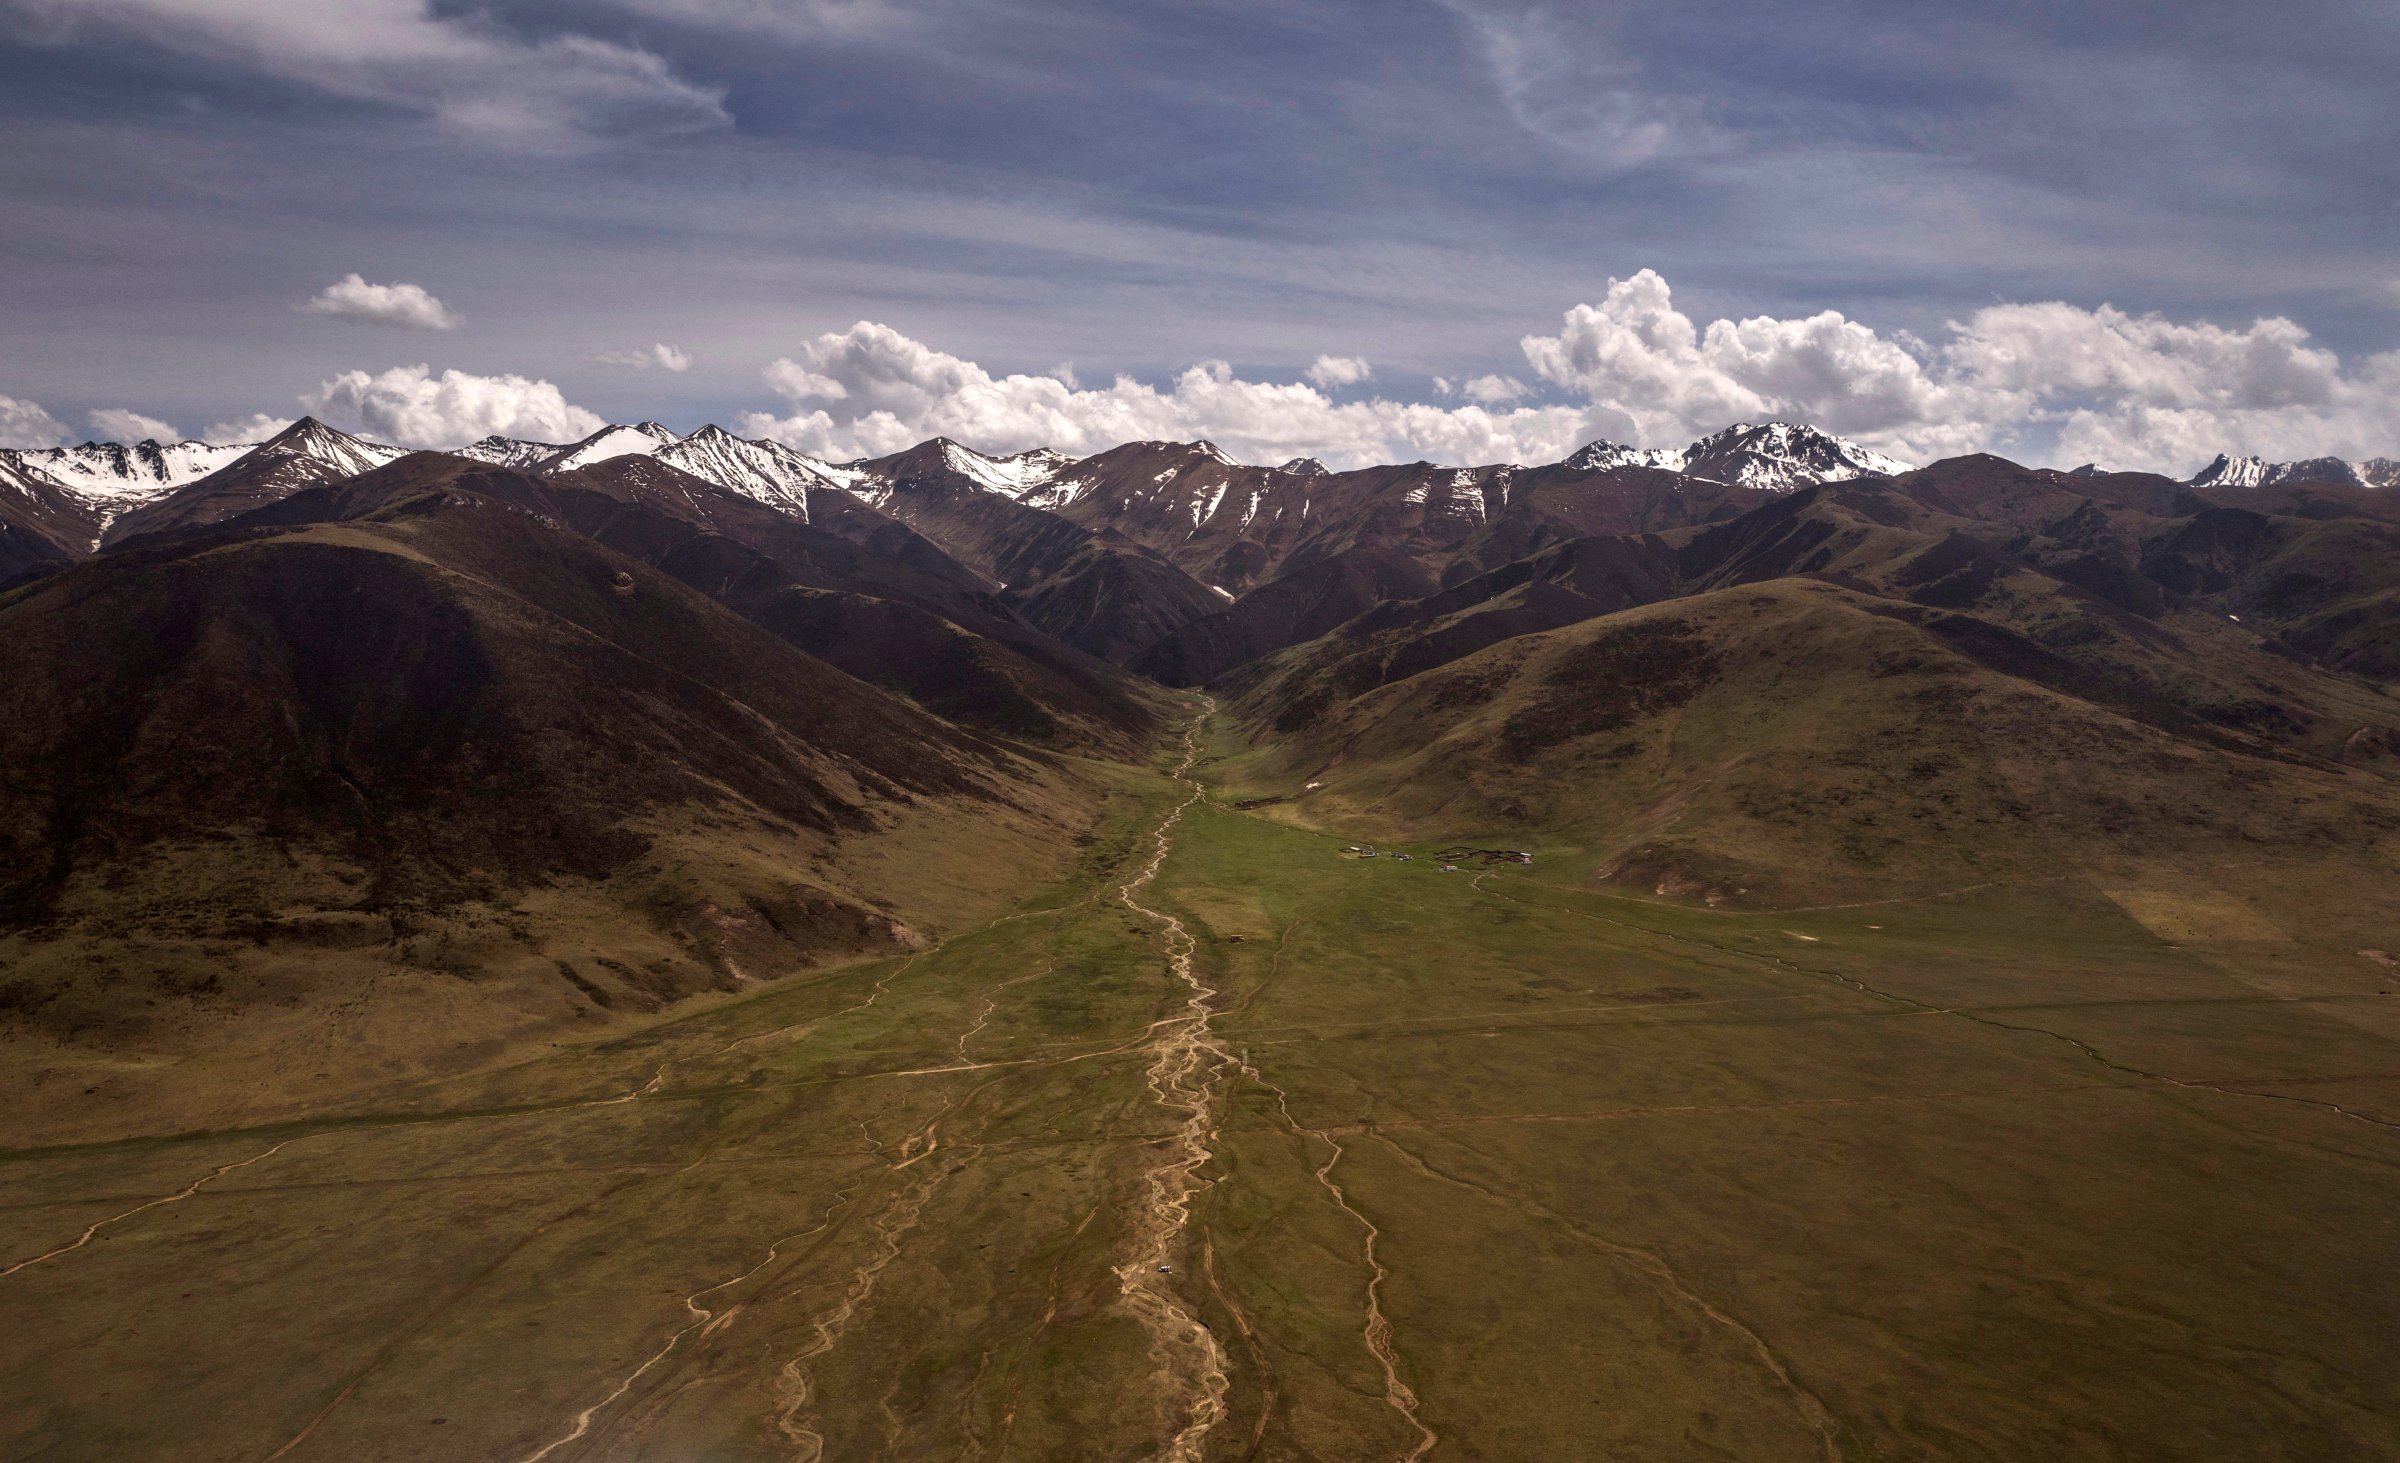 Search For Prized Fungus A Way Of Life On Tibetan Plateau